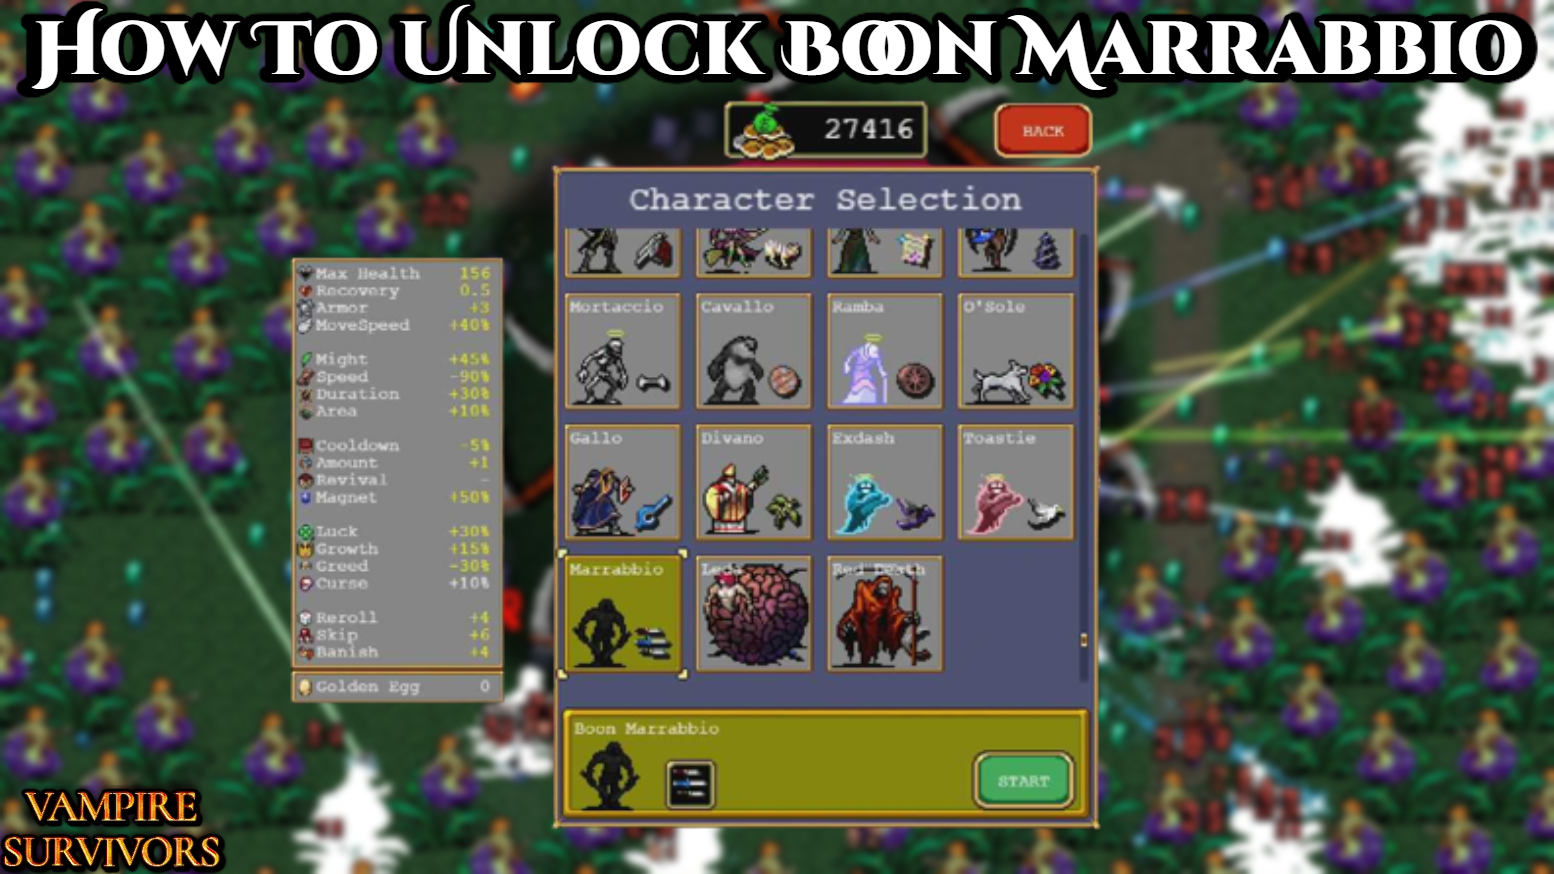 You are currently viewing How To Unlock Boon Marrabbio In Vampire Survivors